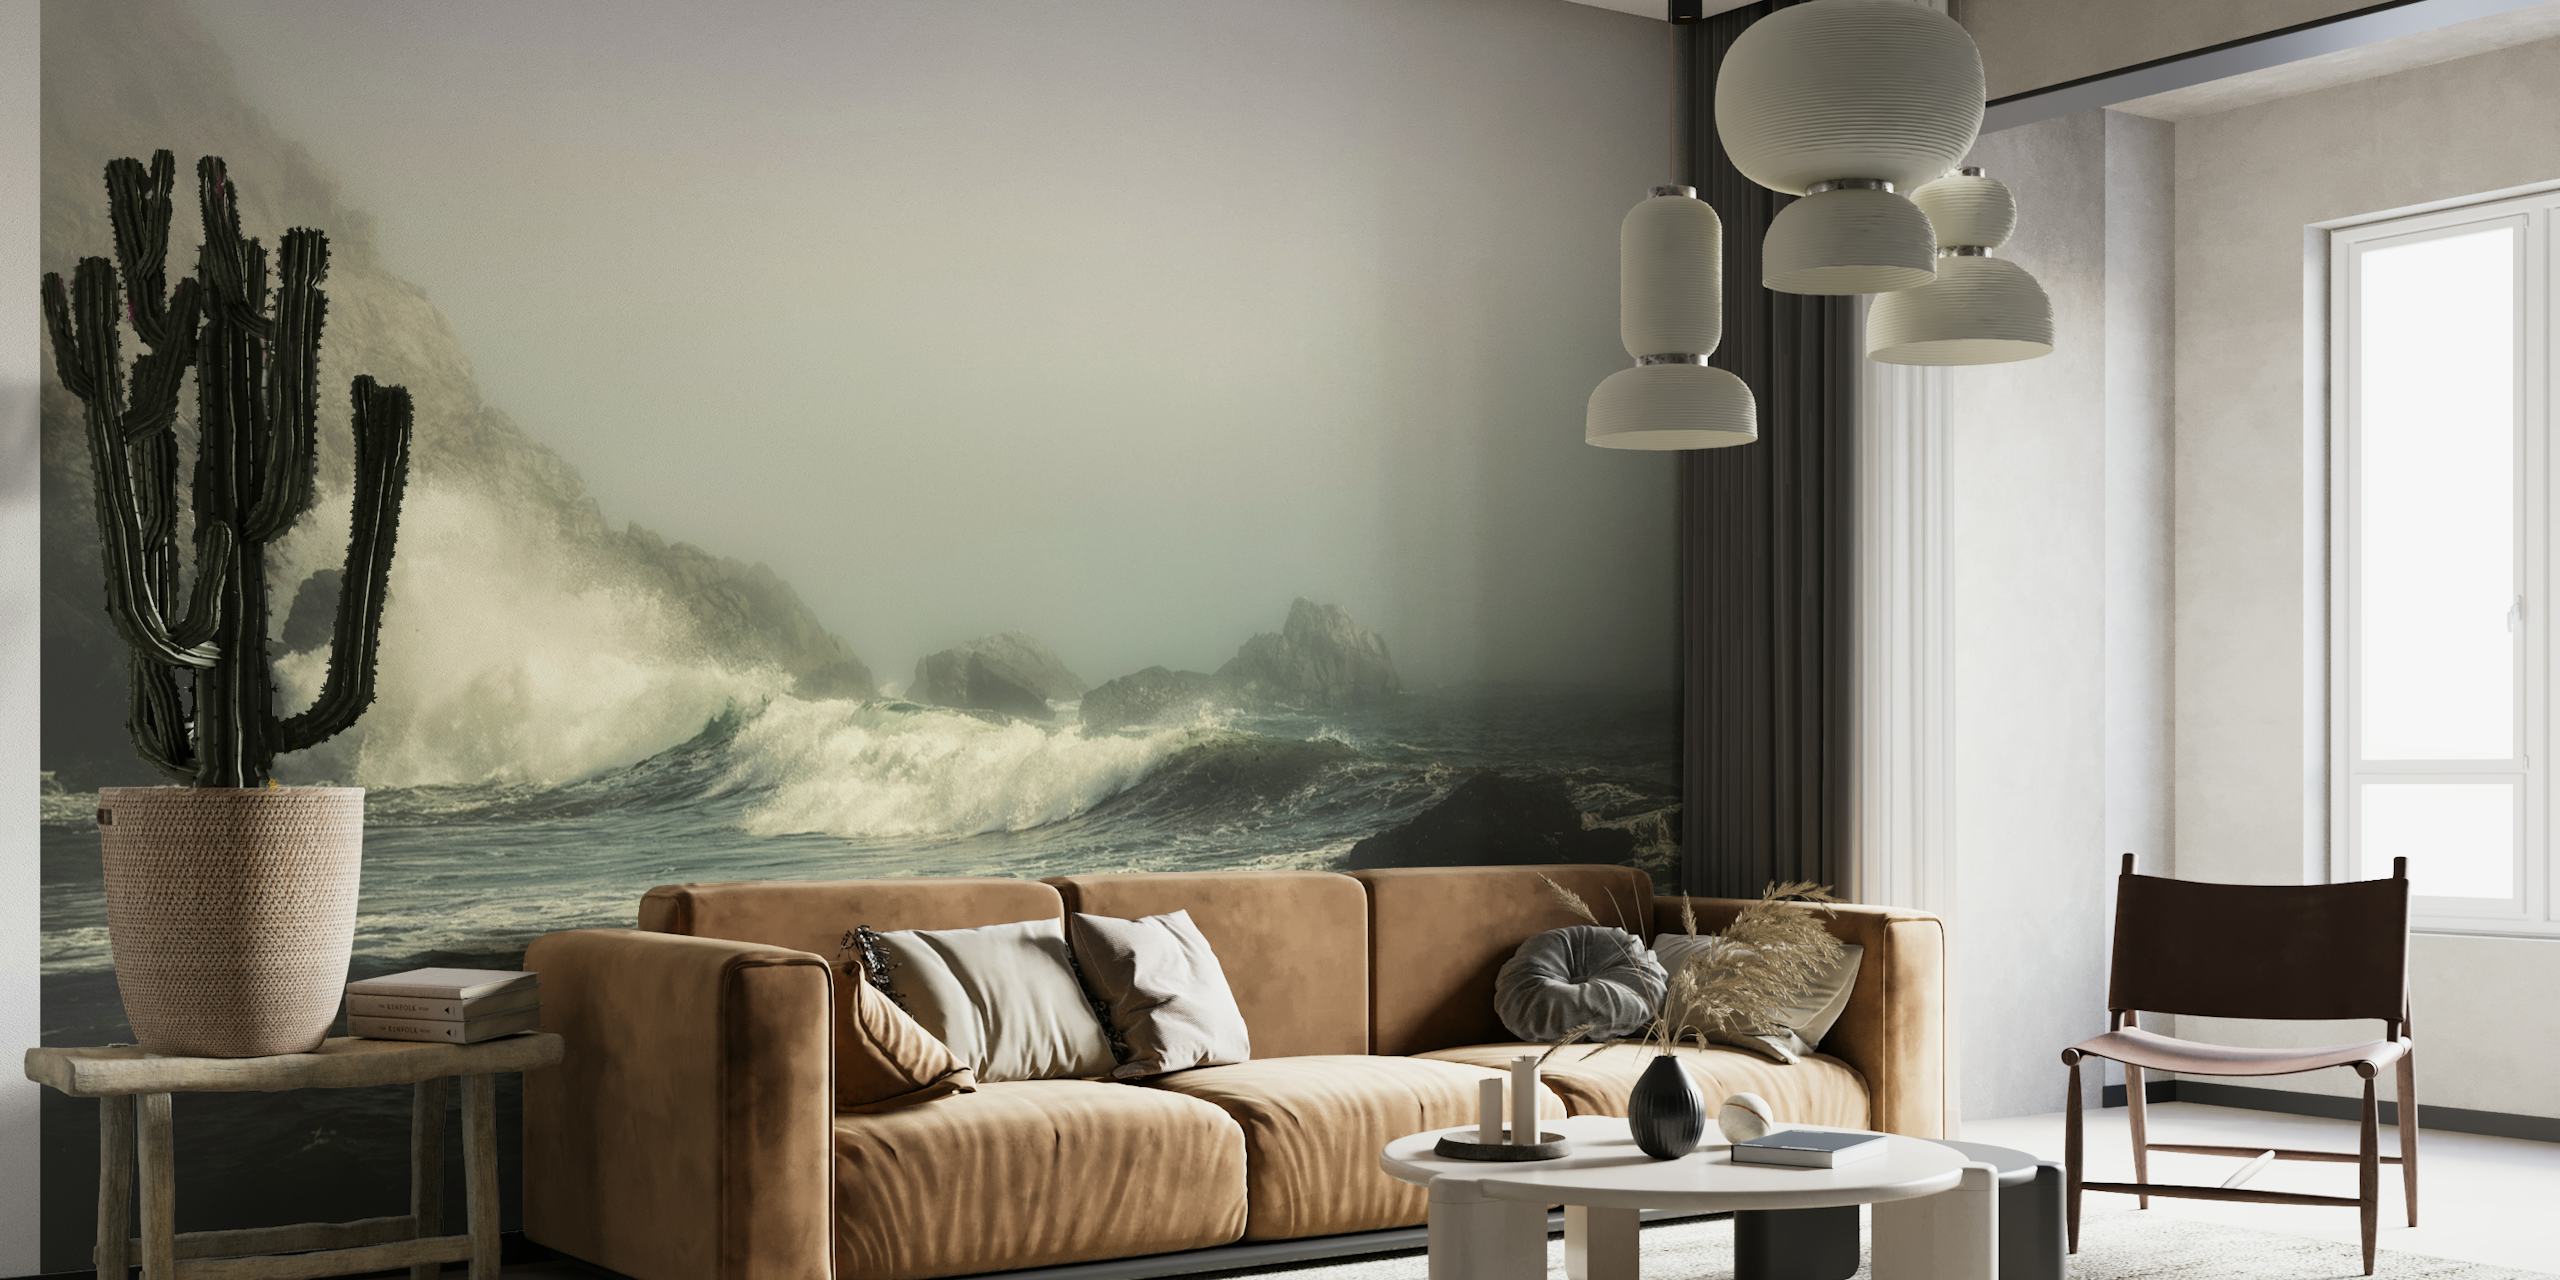 Seascape wall mural with mist and crashing waves against rocks